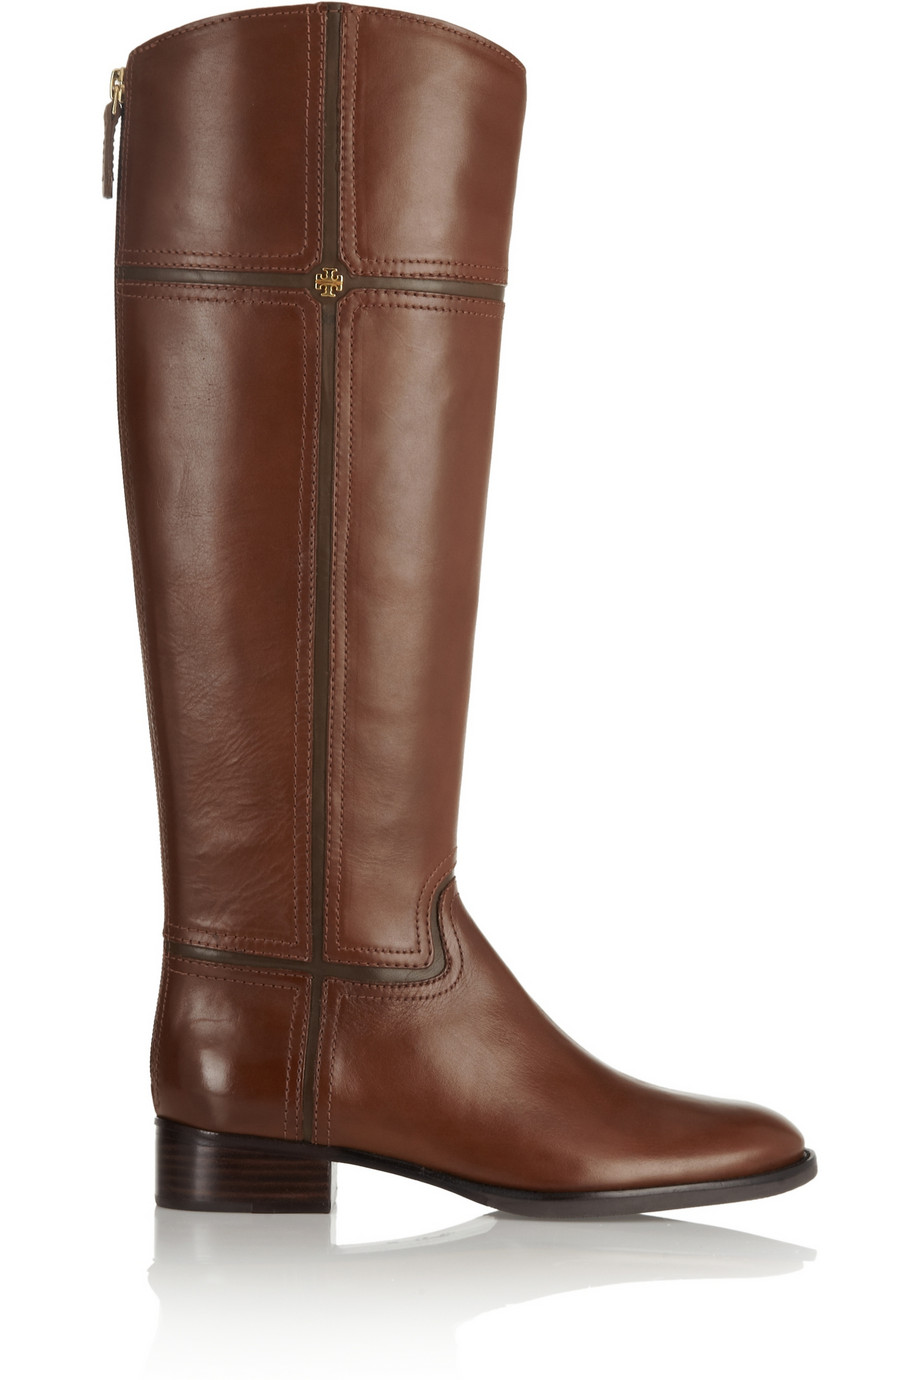 Tory Burch Juliet Leather Riding Boots in Brown - Lyst